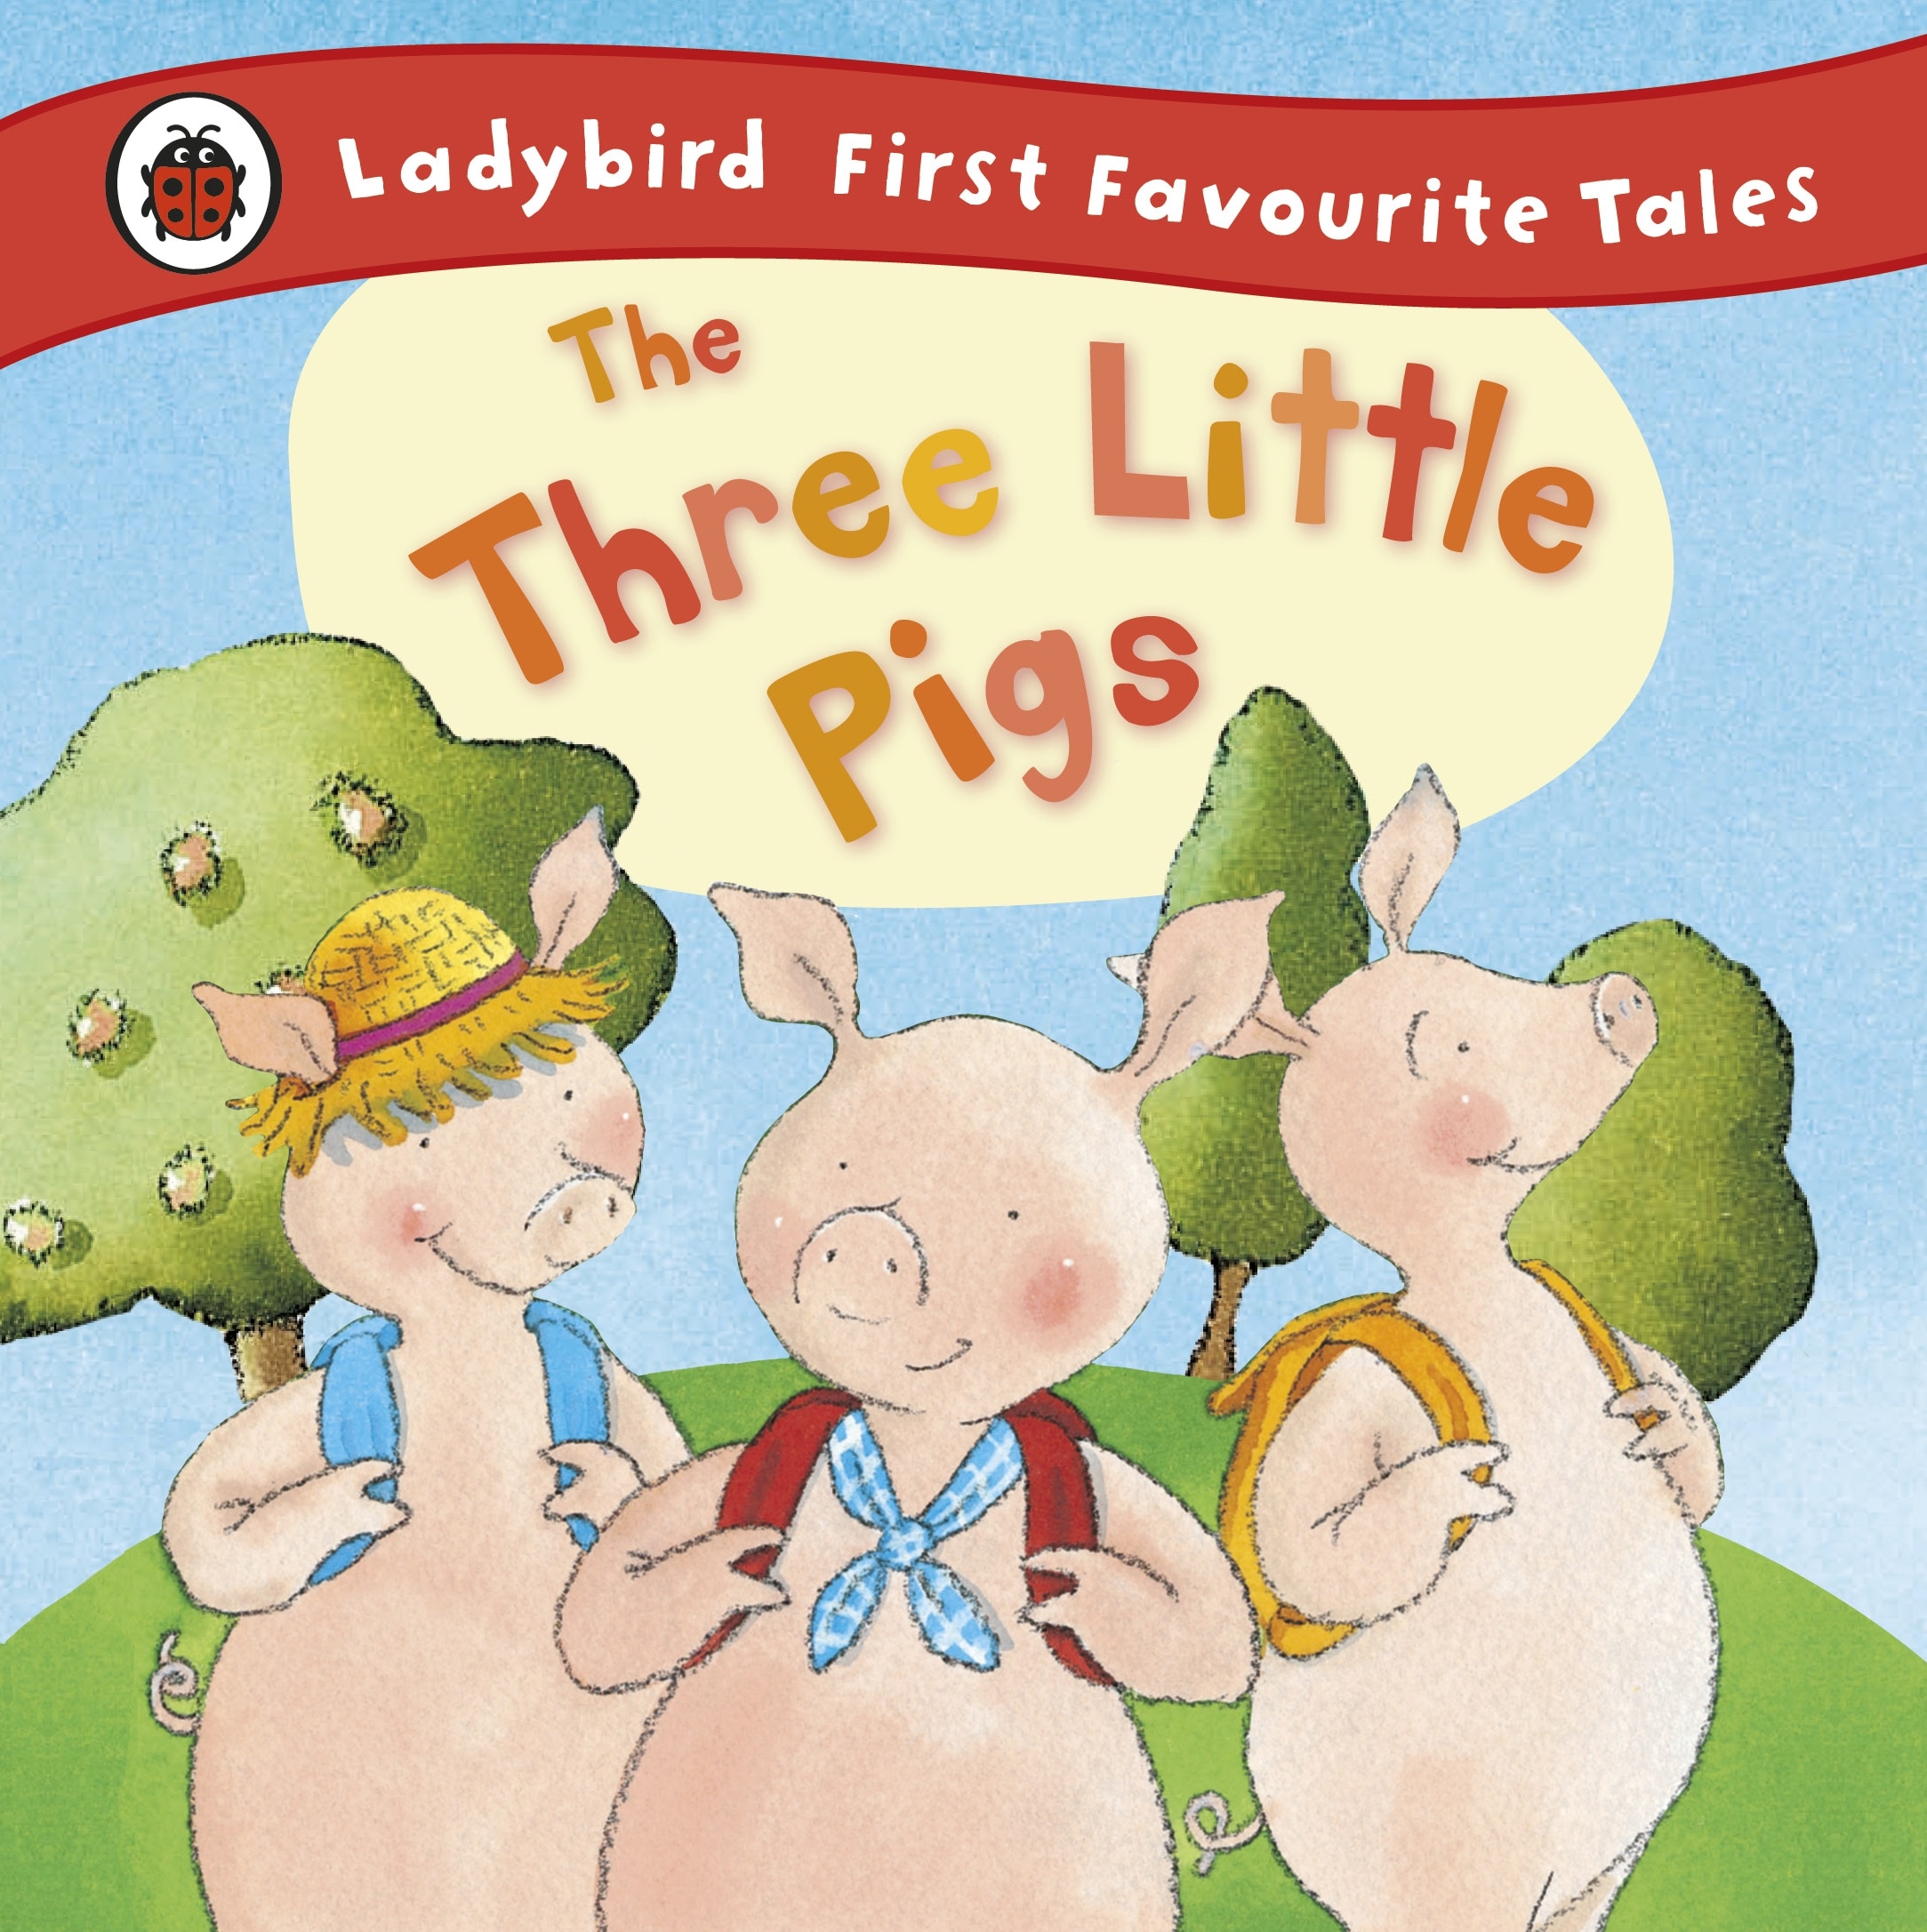 Book “The Three Little Pigs: Ladybird First Favourite Tales” by Nicola Baxter — February 24, 2011